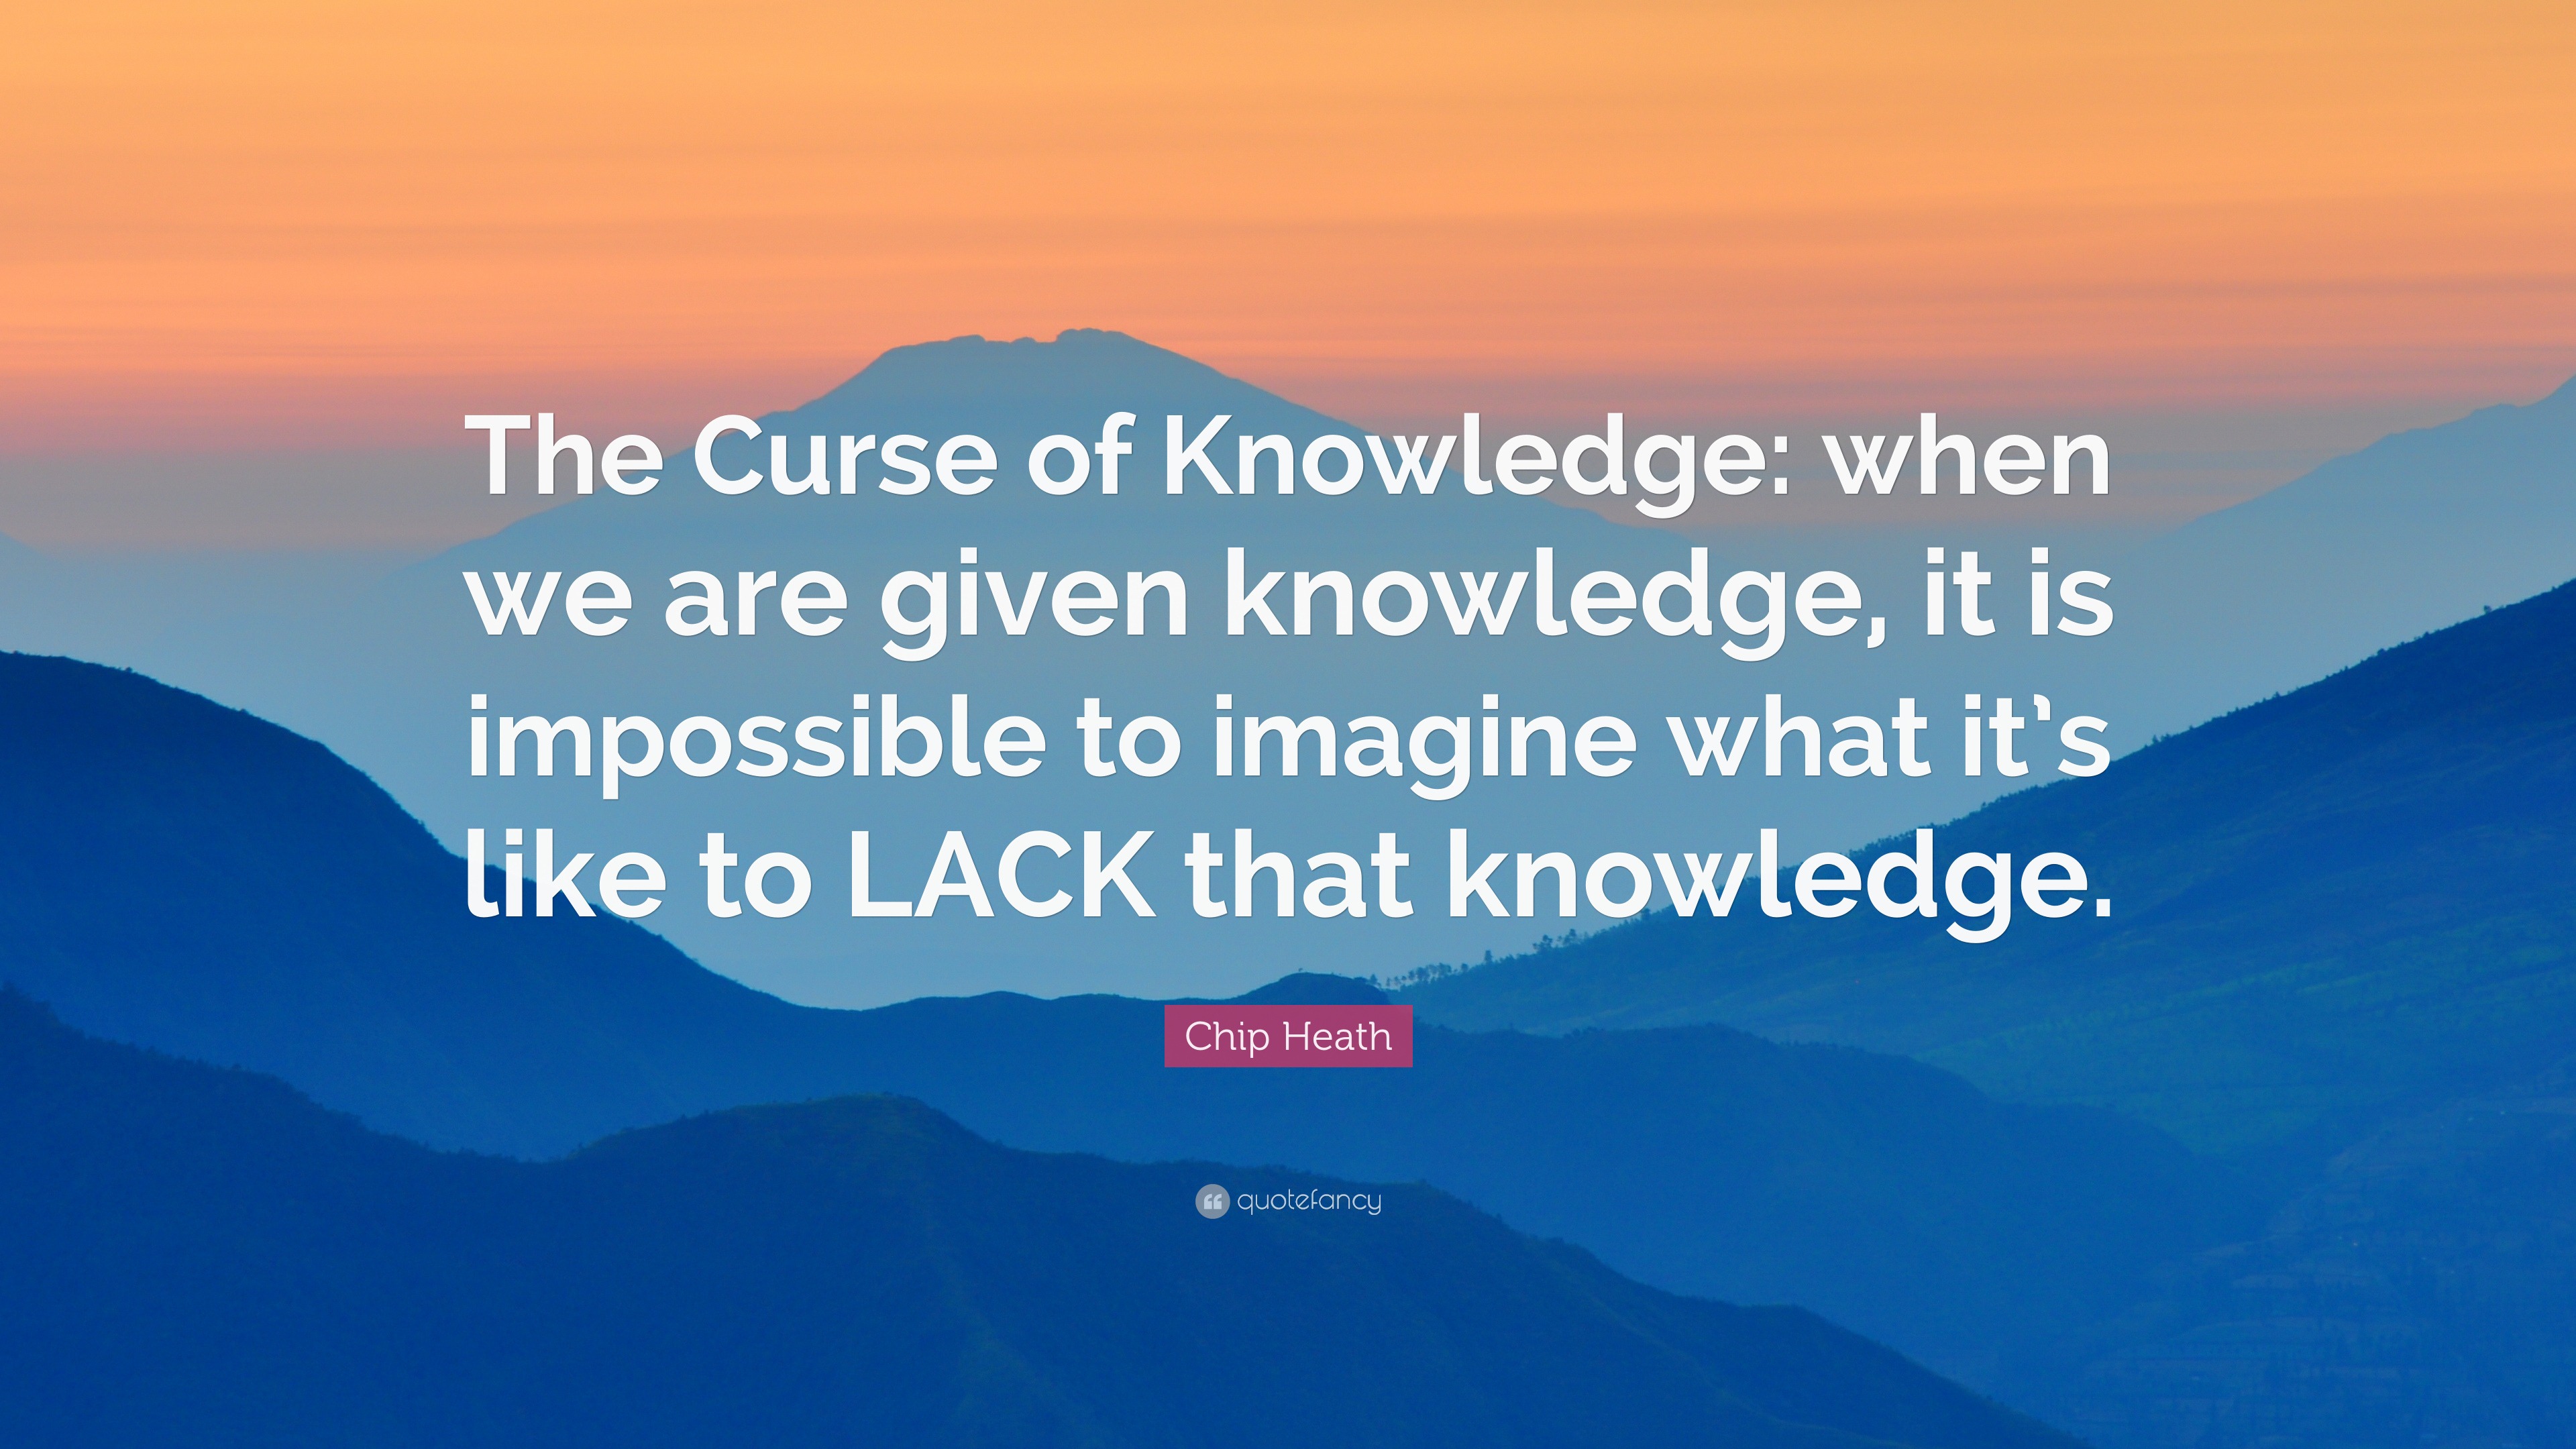 The Curse of Knowledge and How to Defeat It